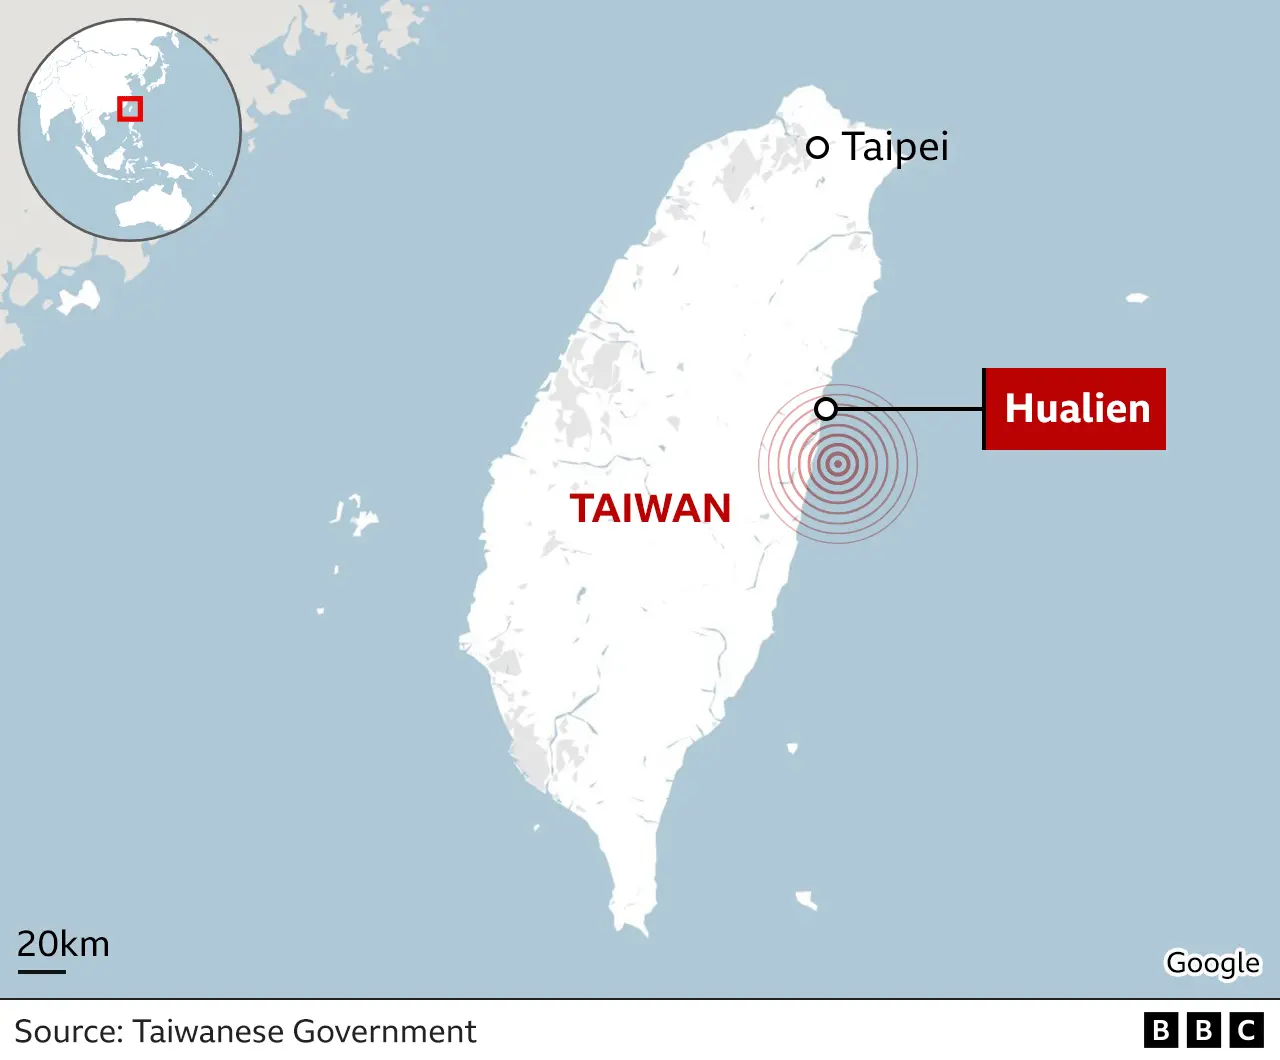 Map of Taiwan and location of earthquake